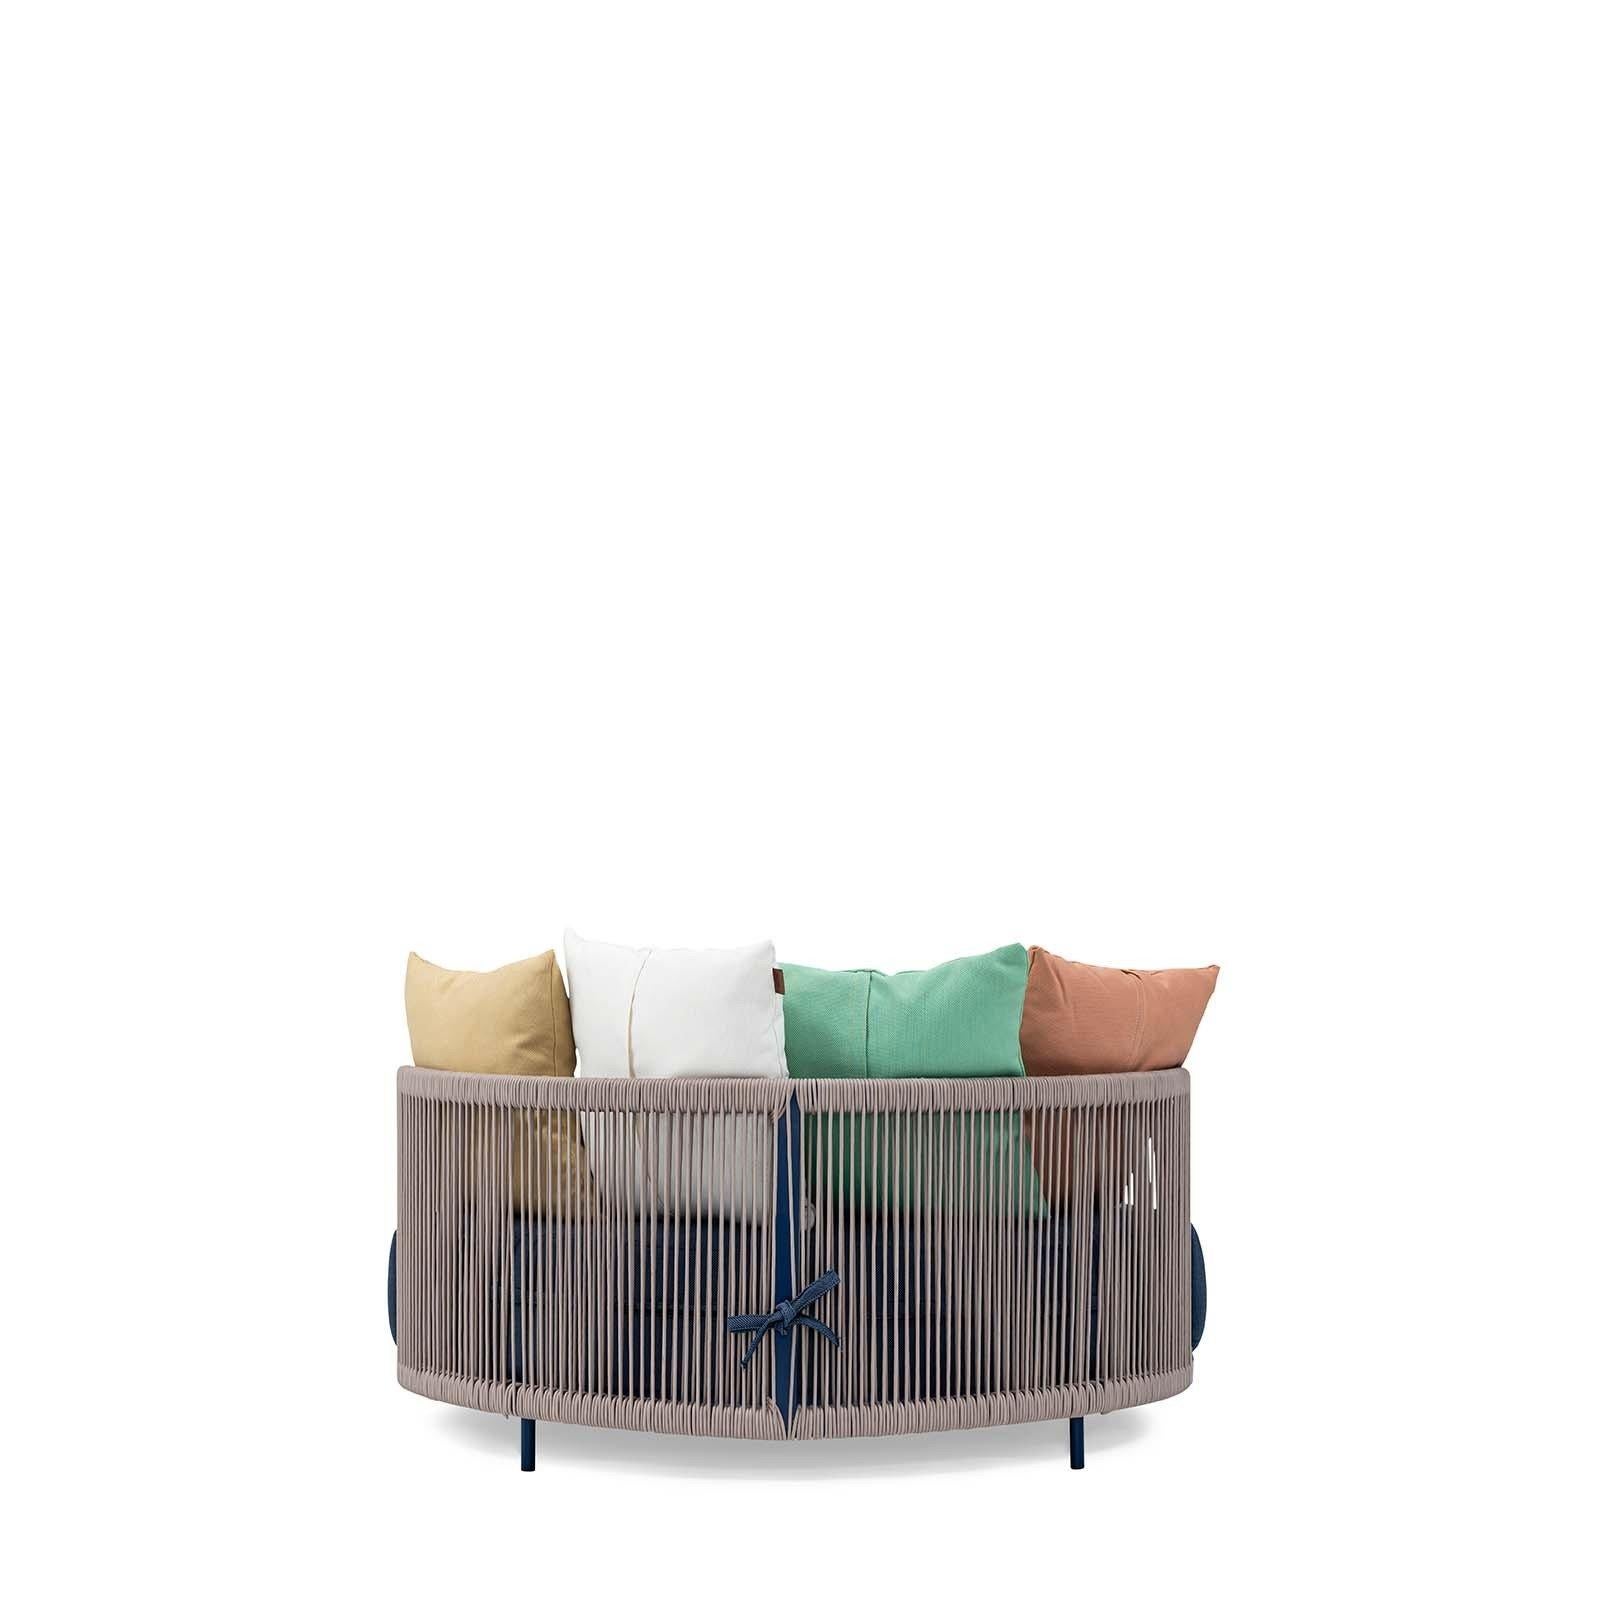 European Outdoor Round Daybed Upholstered in Fabric with Cushions For Sale